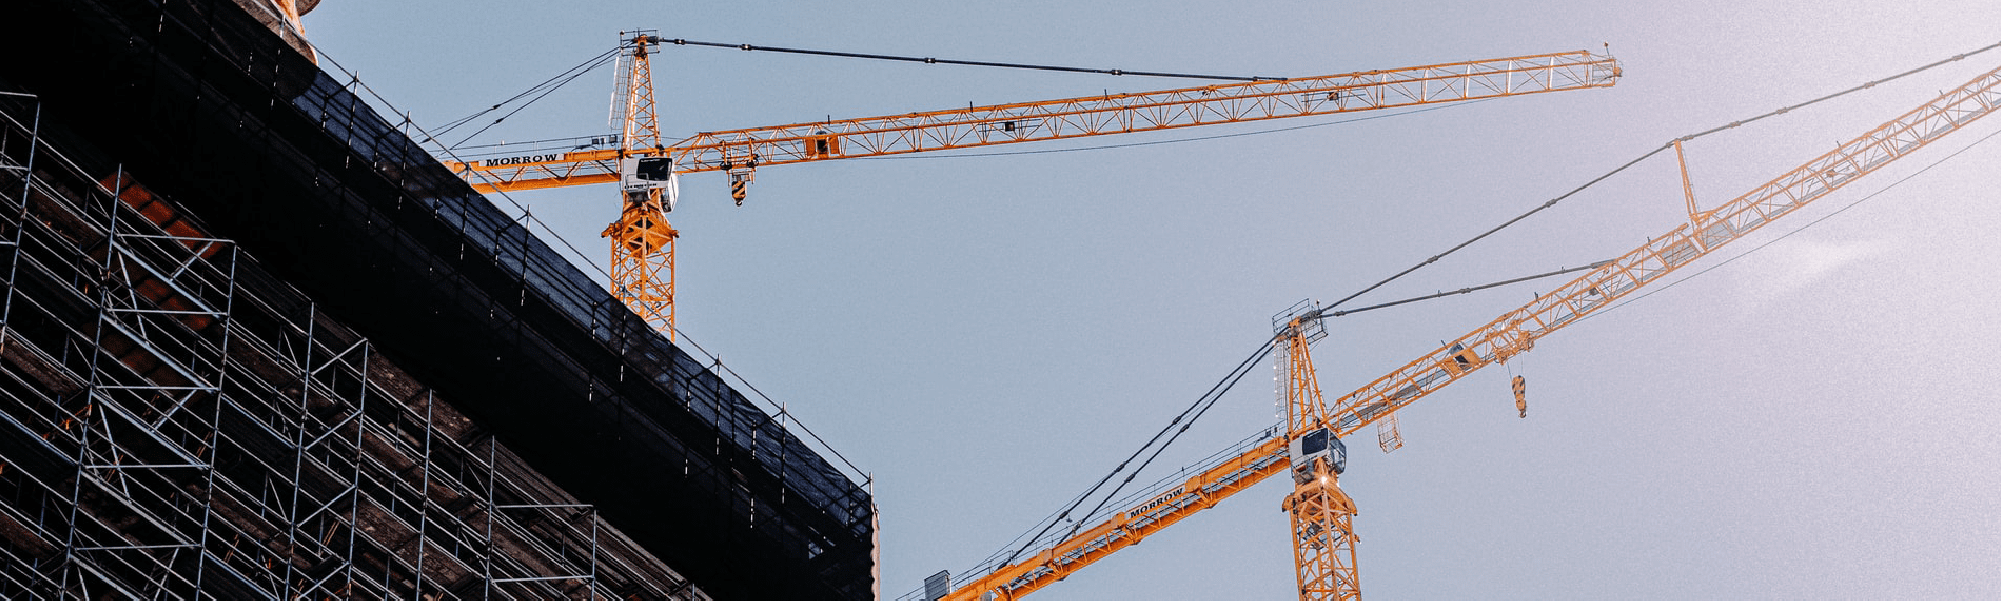 A perspective view of 2 large yellow cranes, picture taken from below